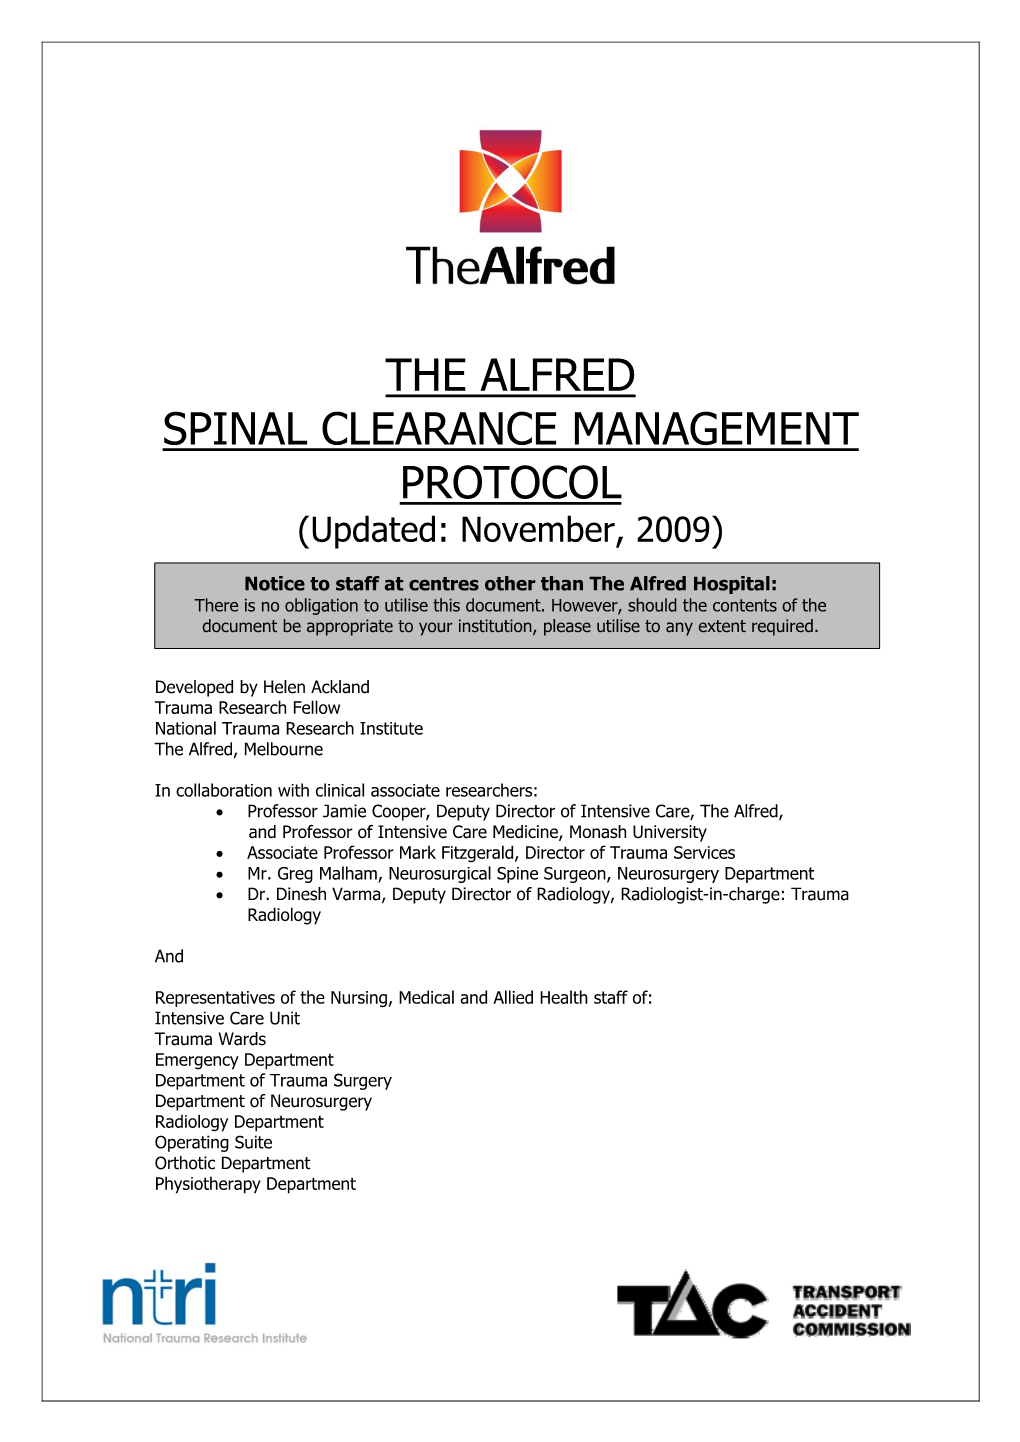 THE ALFRED SPINAL CLEARANCE MANAGEMENT PROTOCOL (Updated: November, 2009)